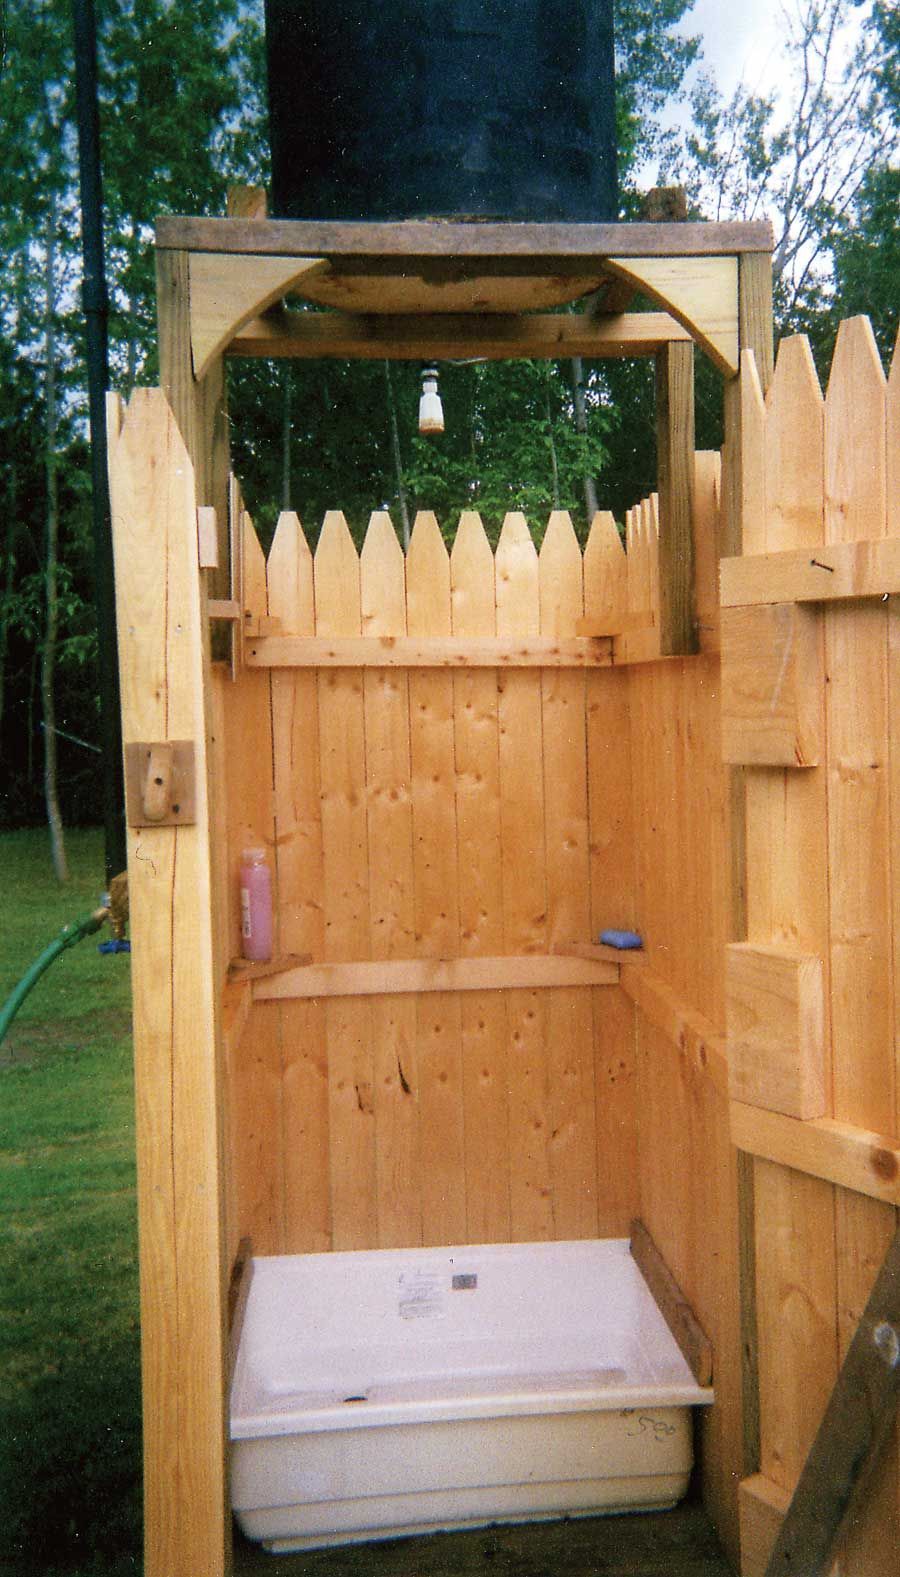 The water for this homemade outdoor shower is heated by the sun, saving you money and energy. You can build it with a bit of